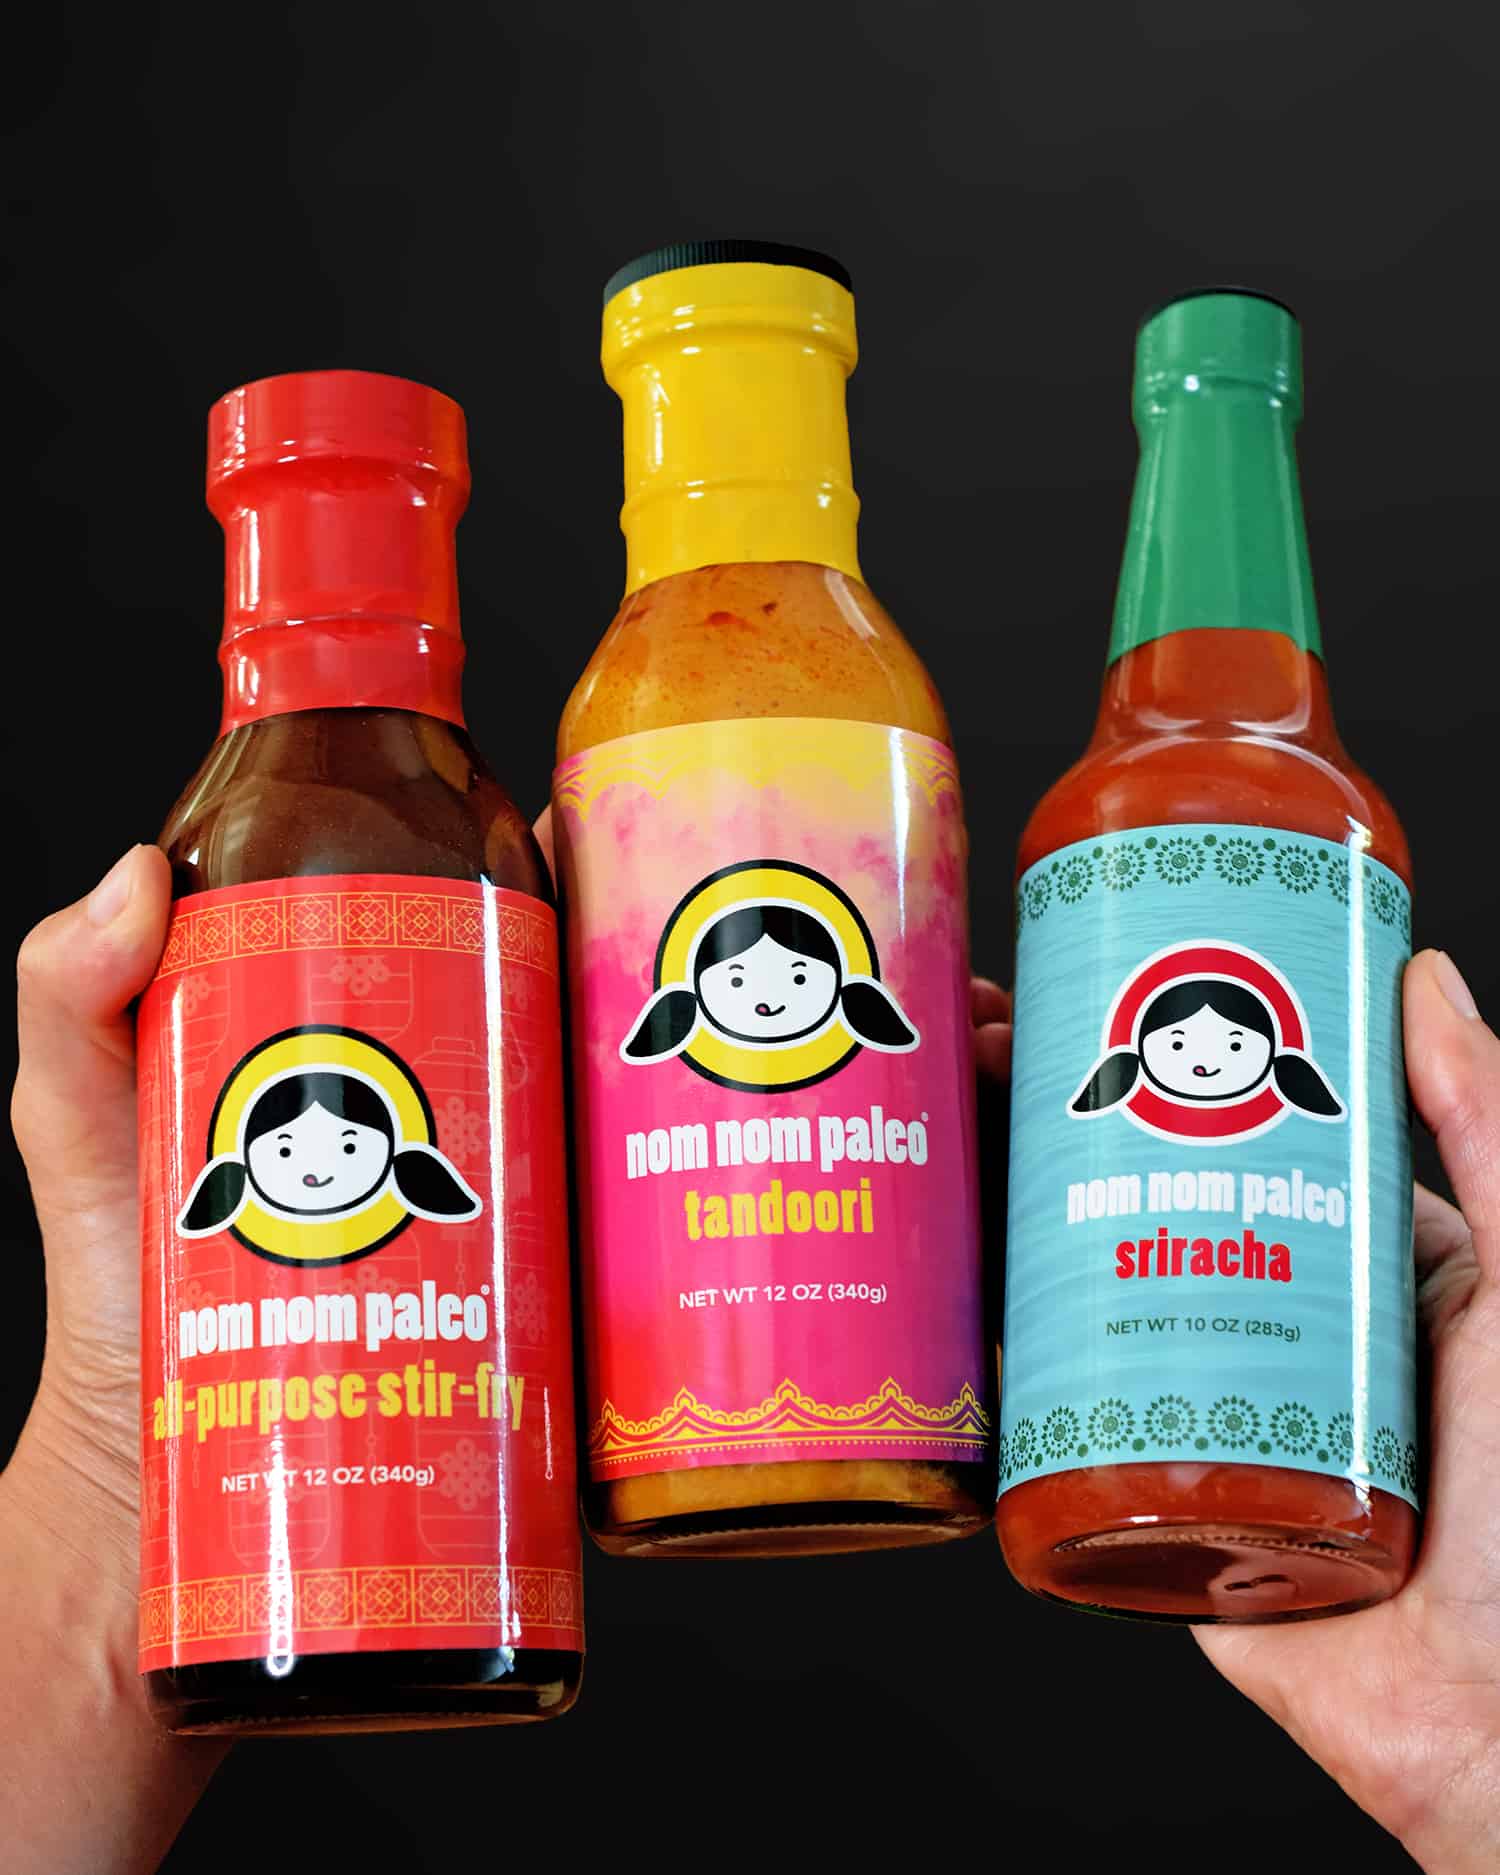 Two hands are holding up three bottles of Nom Nom Paleo sauces: All-Purpose Stir-Fry, Tandoori, and Sriracha!